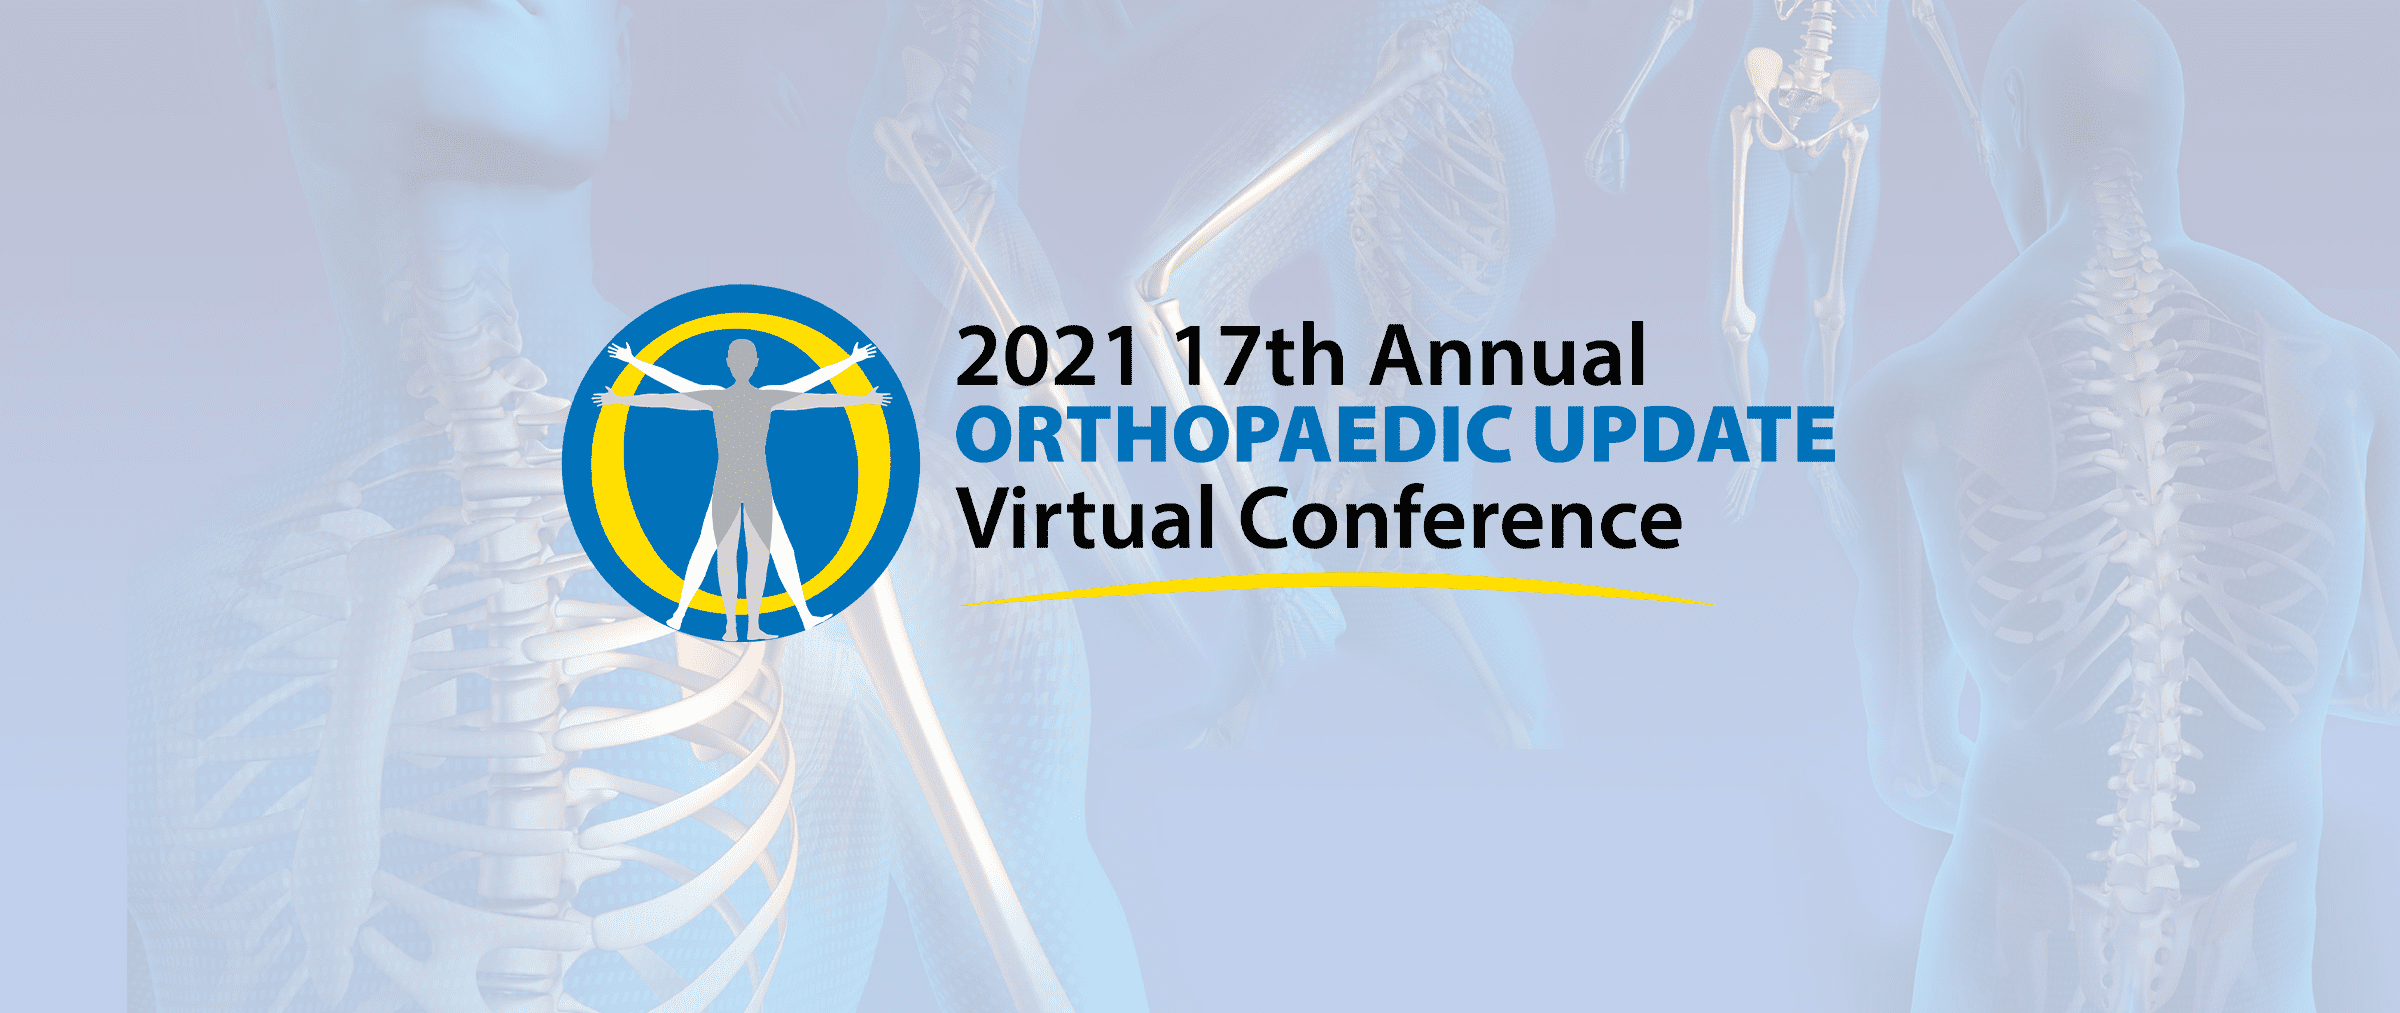 2021 17th Annual Orthopaedic Update Virtual Conference Orlando